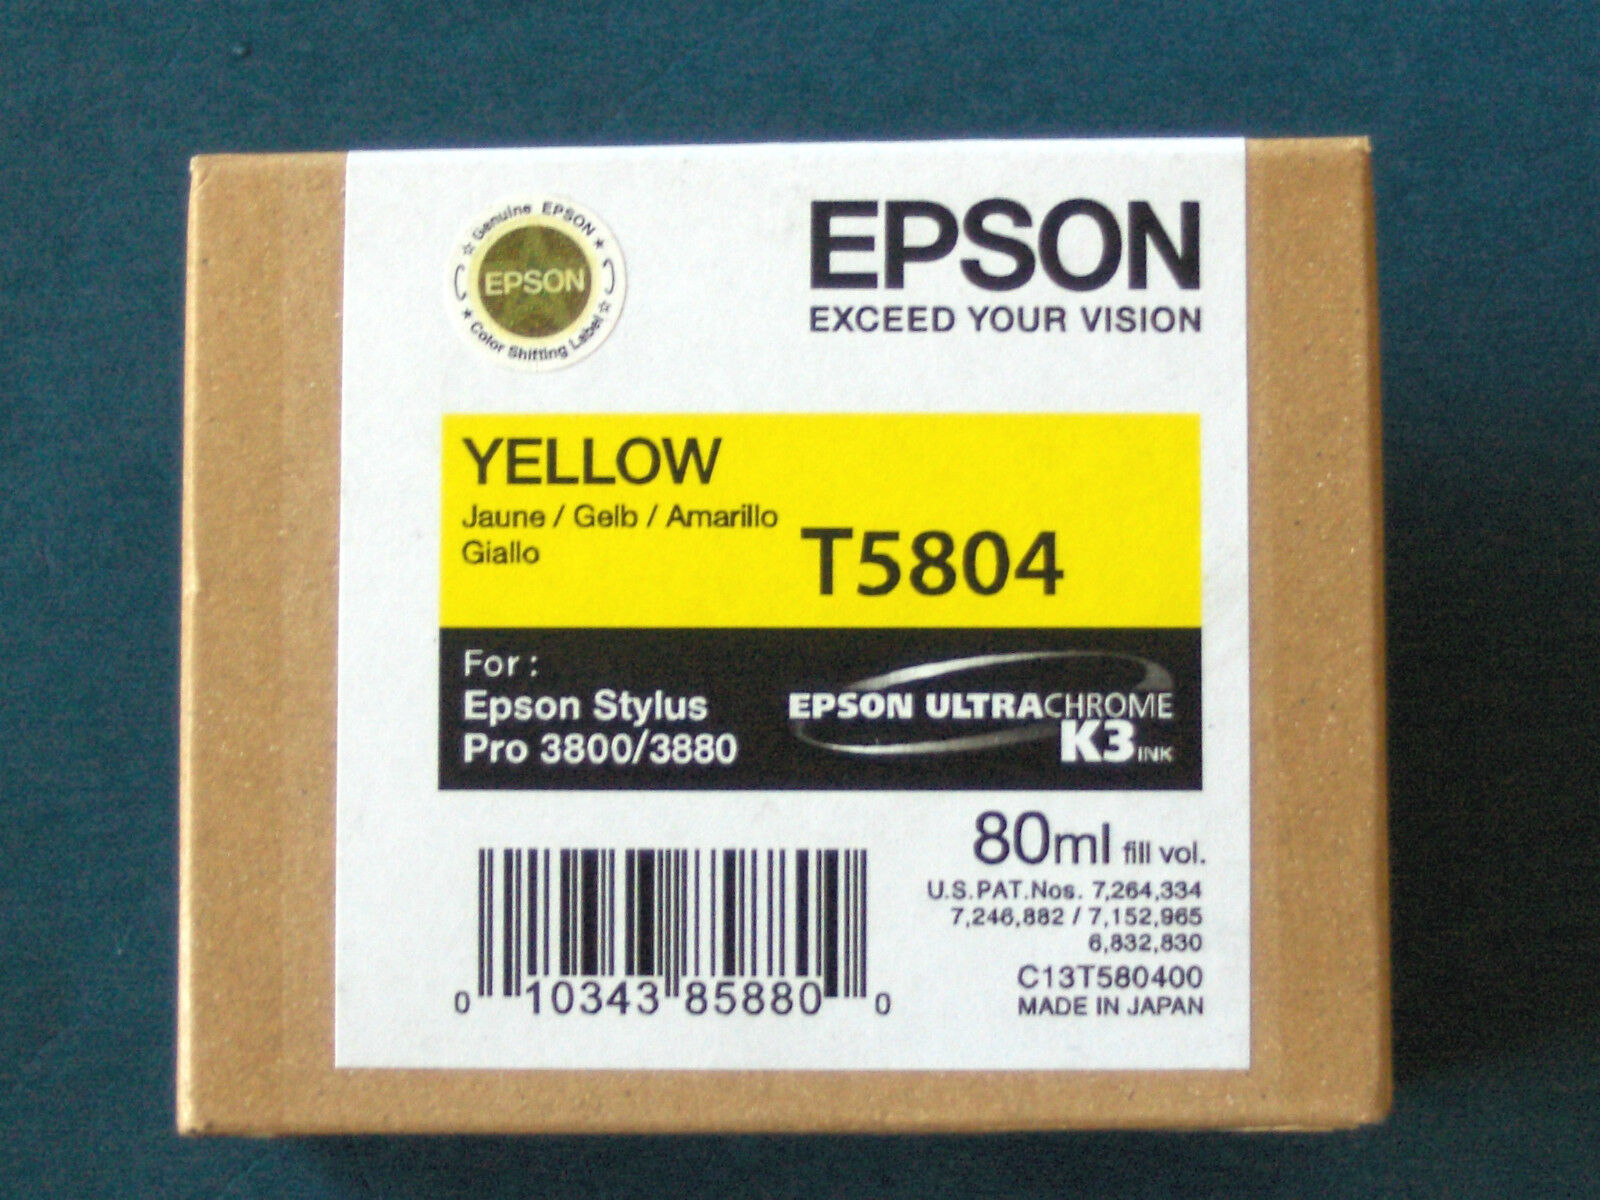 New in Box Exp 02-2024 Genuine Epson Pro 3800 3880 Yellow K3 Ink T5804 T580400